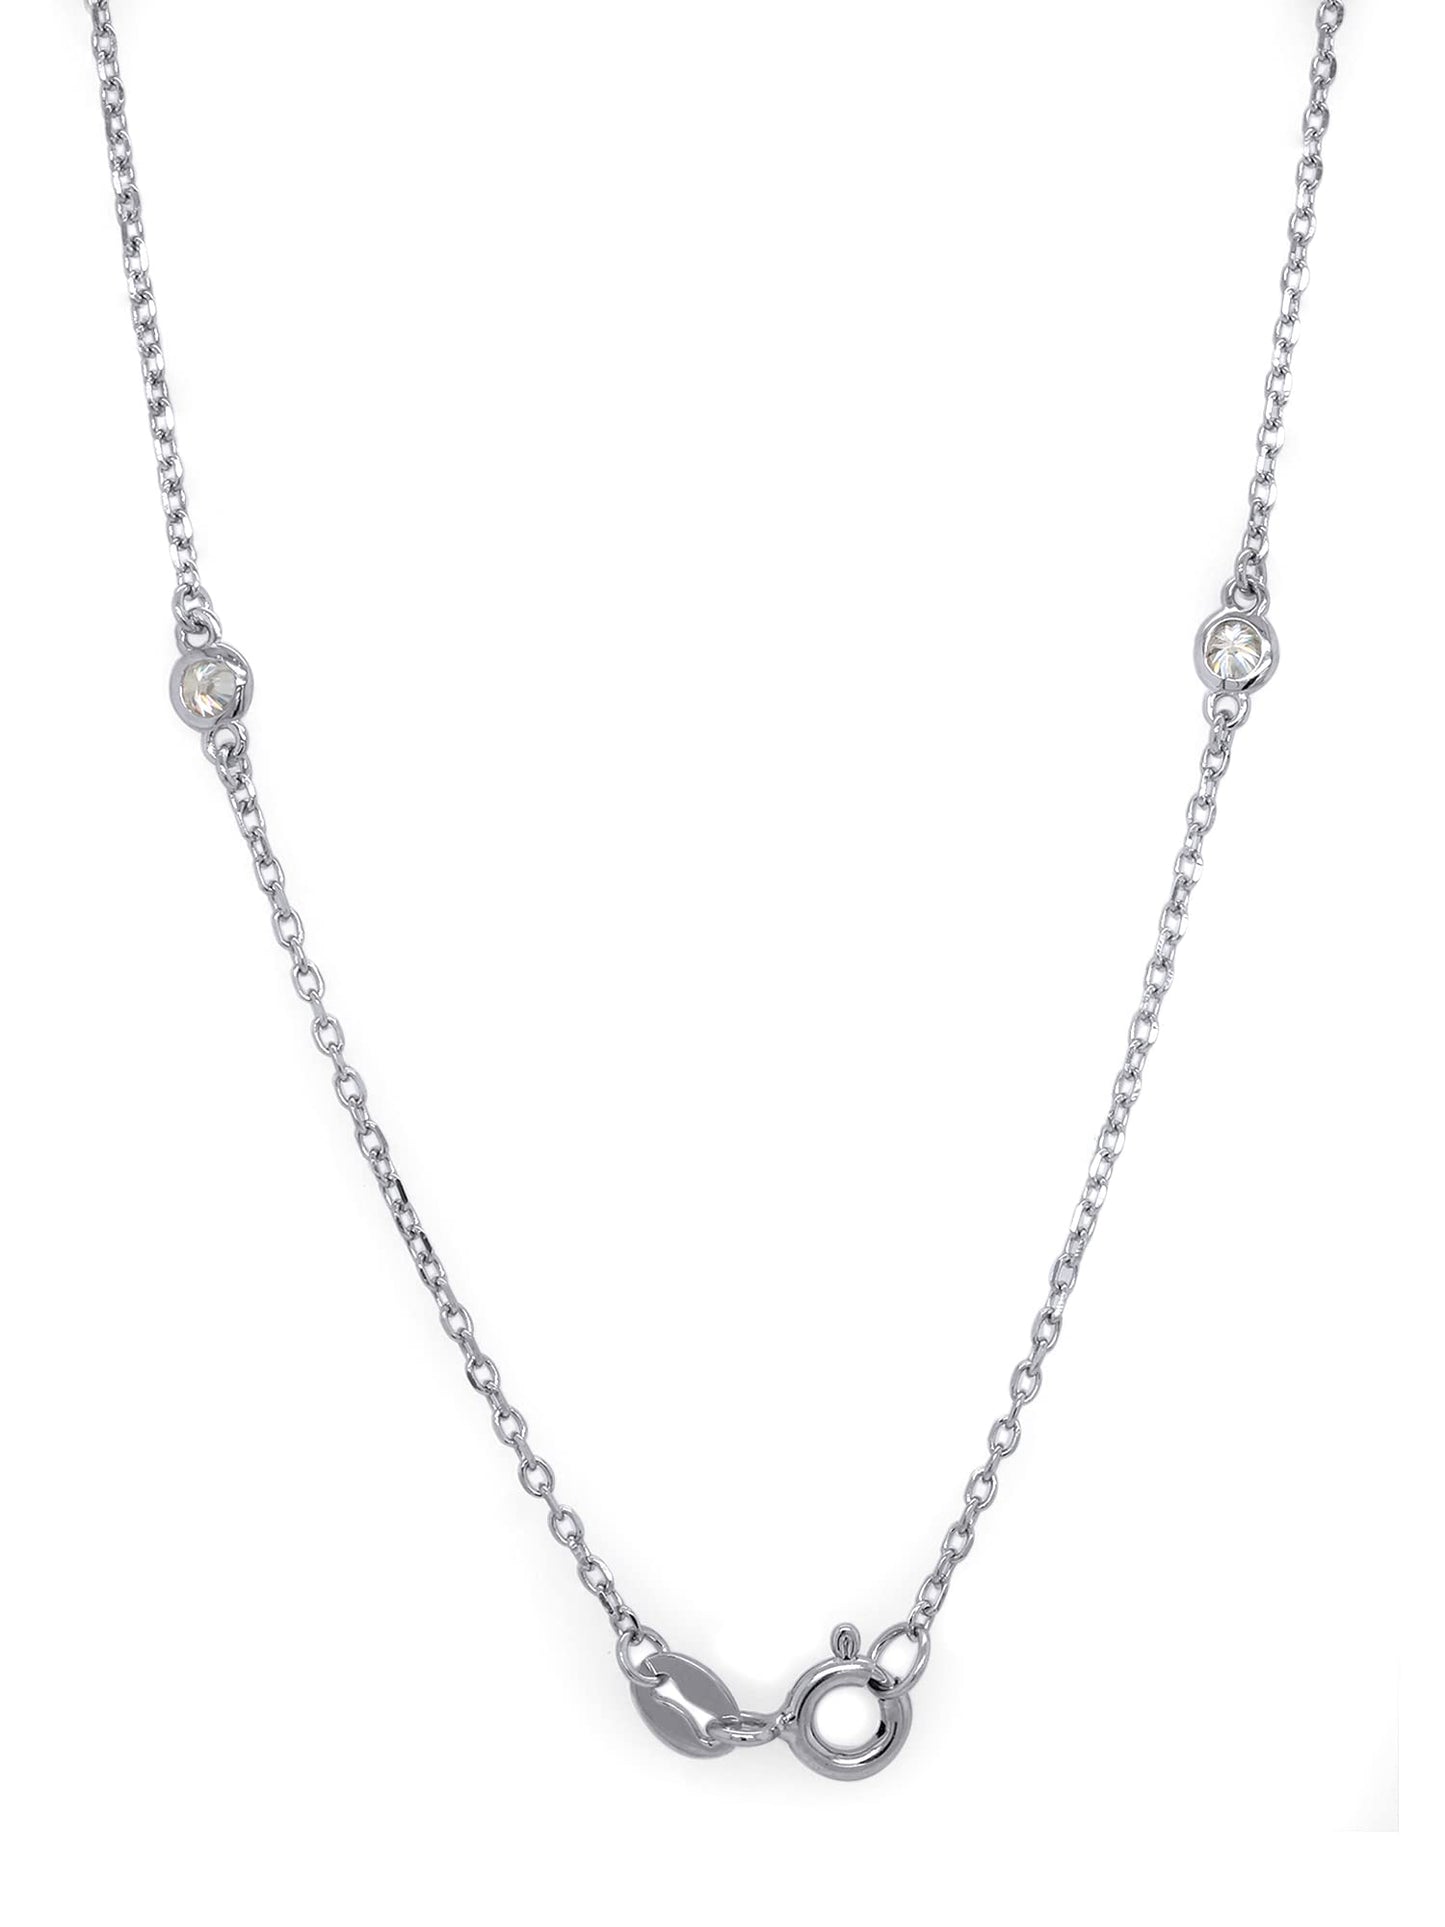 2.9MM Round Cut Moissanite Diamond Lab Created Bezel Set Yard Station Chain Necklace In 925 Sterling Jewelry 16'' To 36" Chain